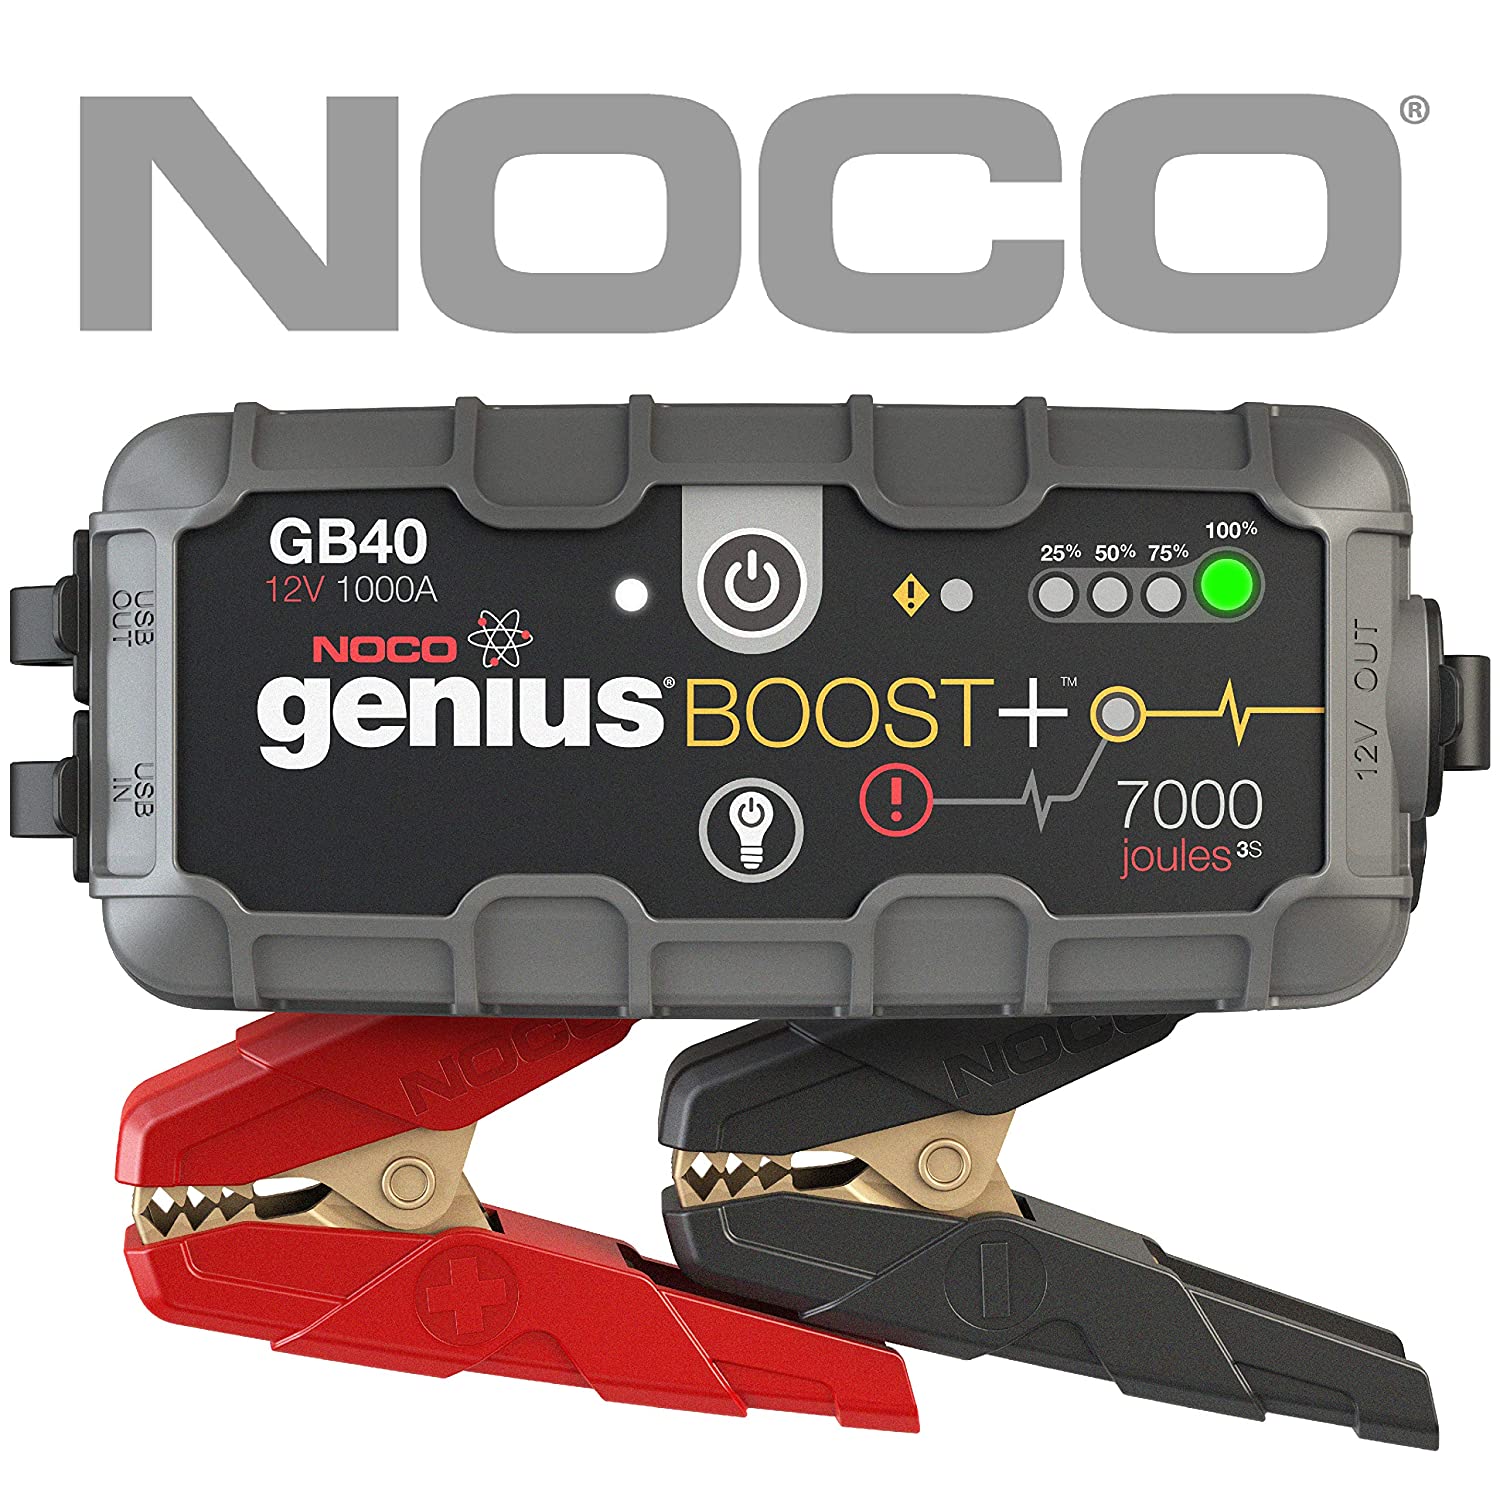 NOCO Boost Plus GB40 1000 Amp 12V UltraSafe Lithium Jump Starter for up to 6L Gasoline and 3L Diesel Engines [1000 Amps] $71.94